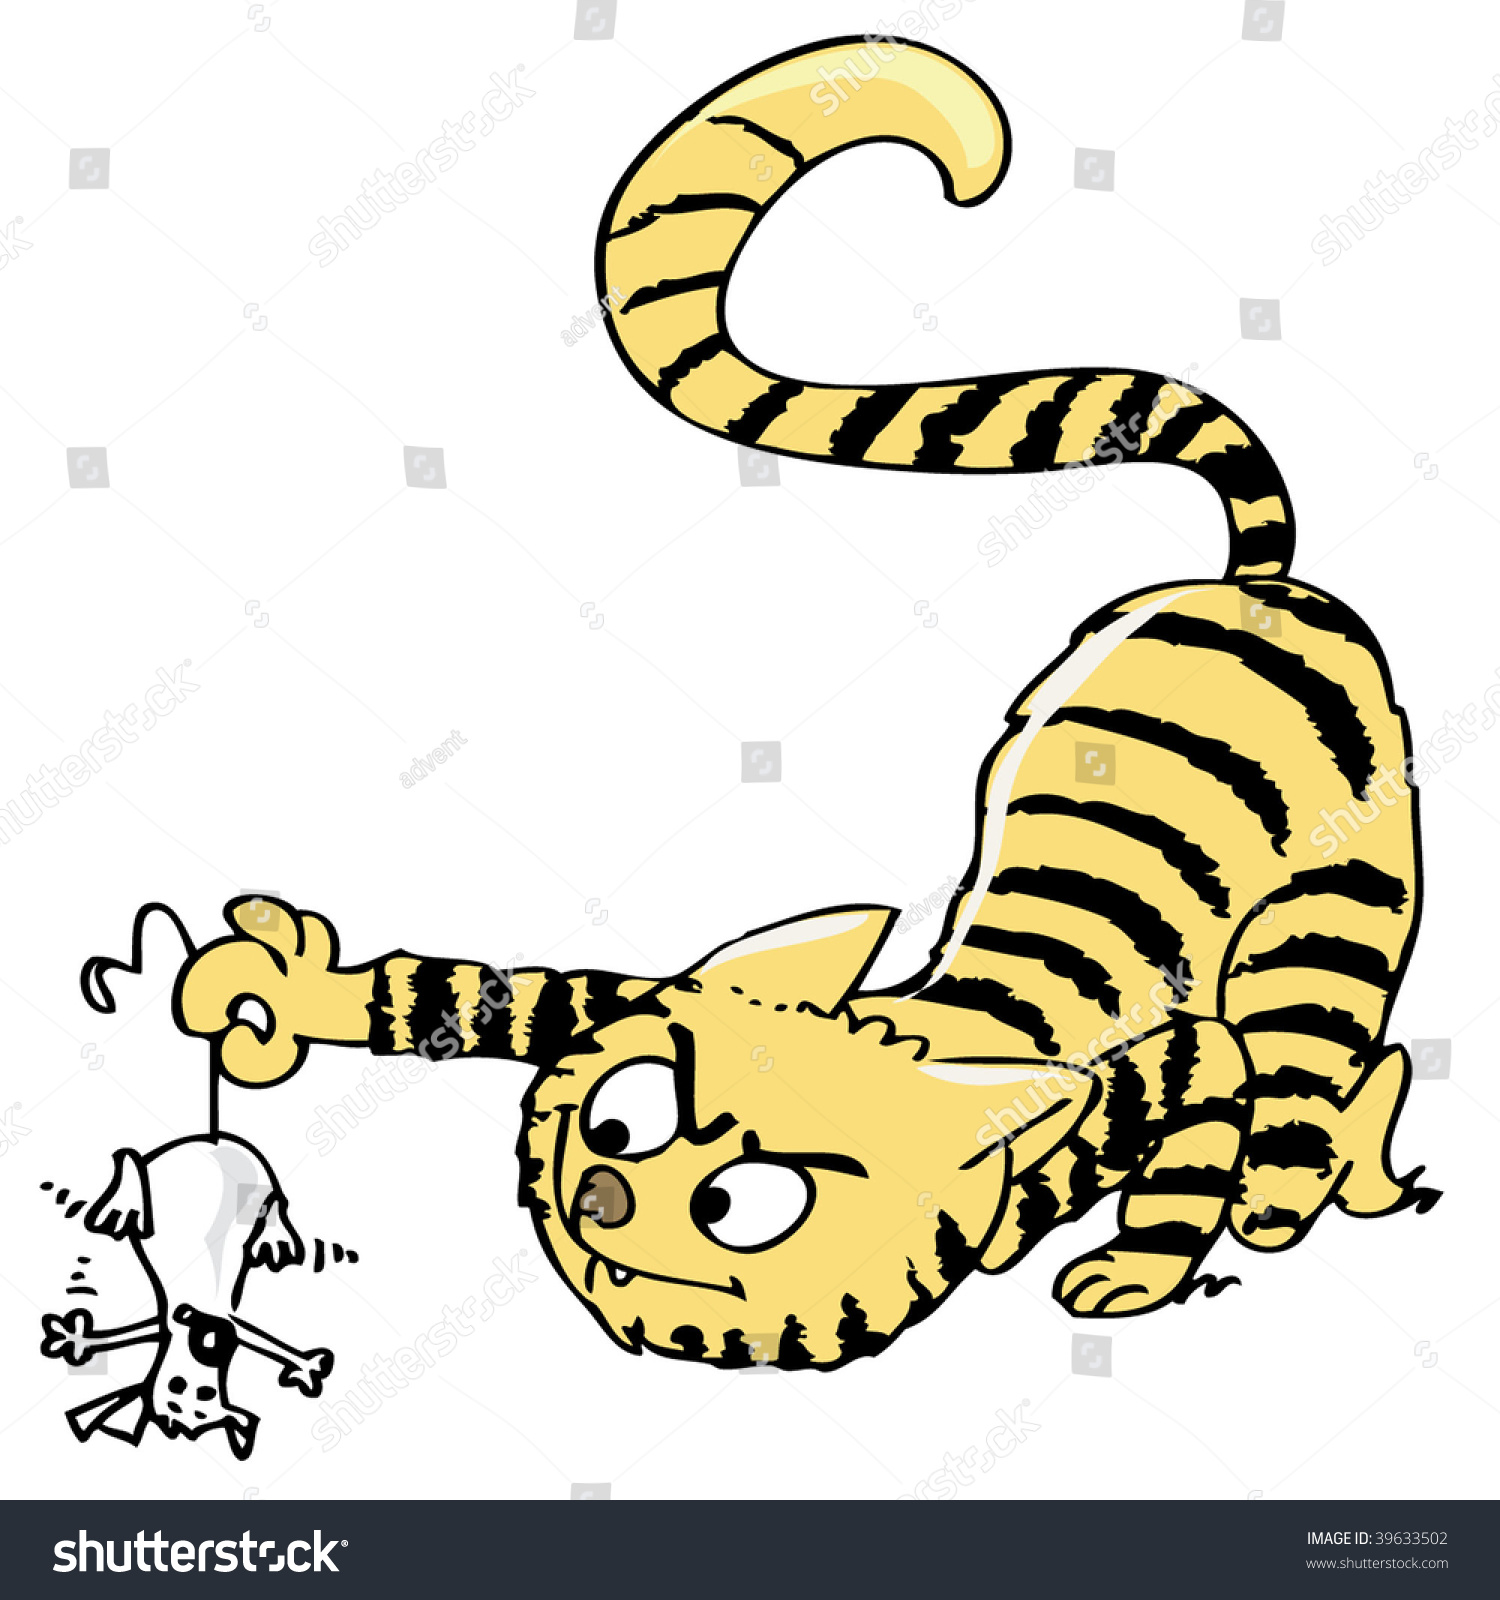 clipart cat and mouse - photo #24